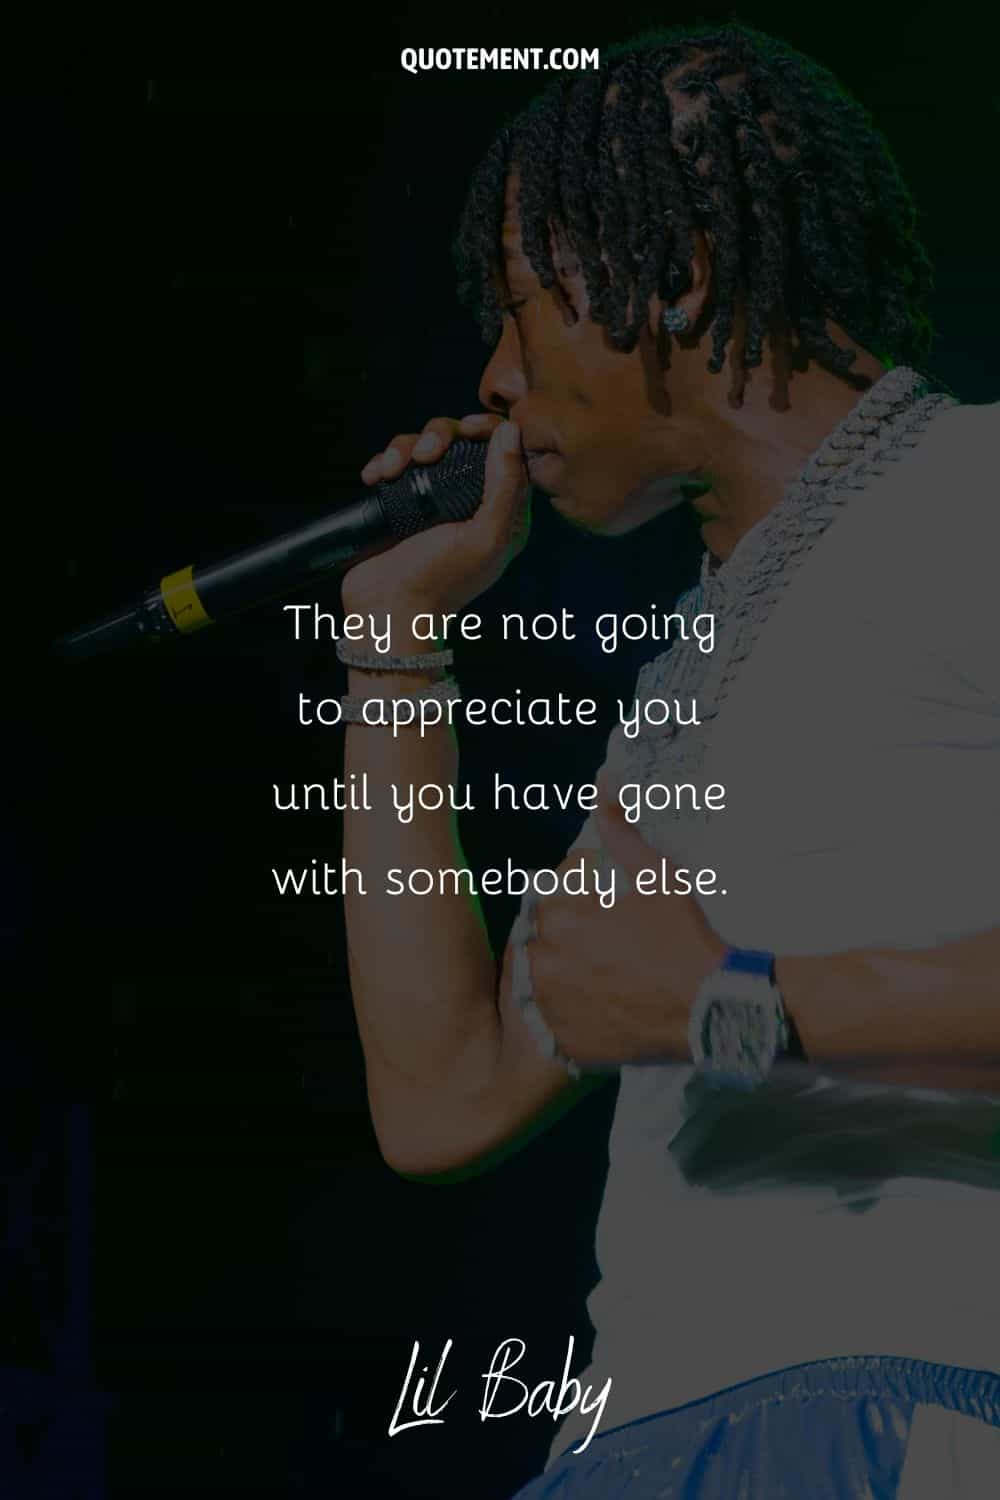 rapper with icy watch image representing lil baby loyalty quote